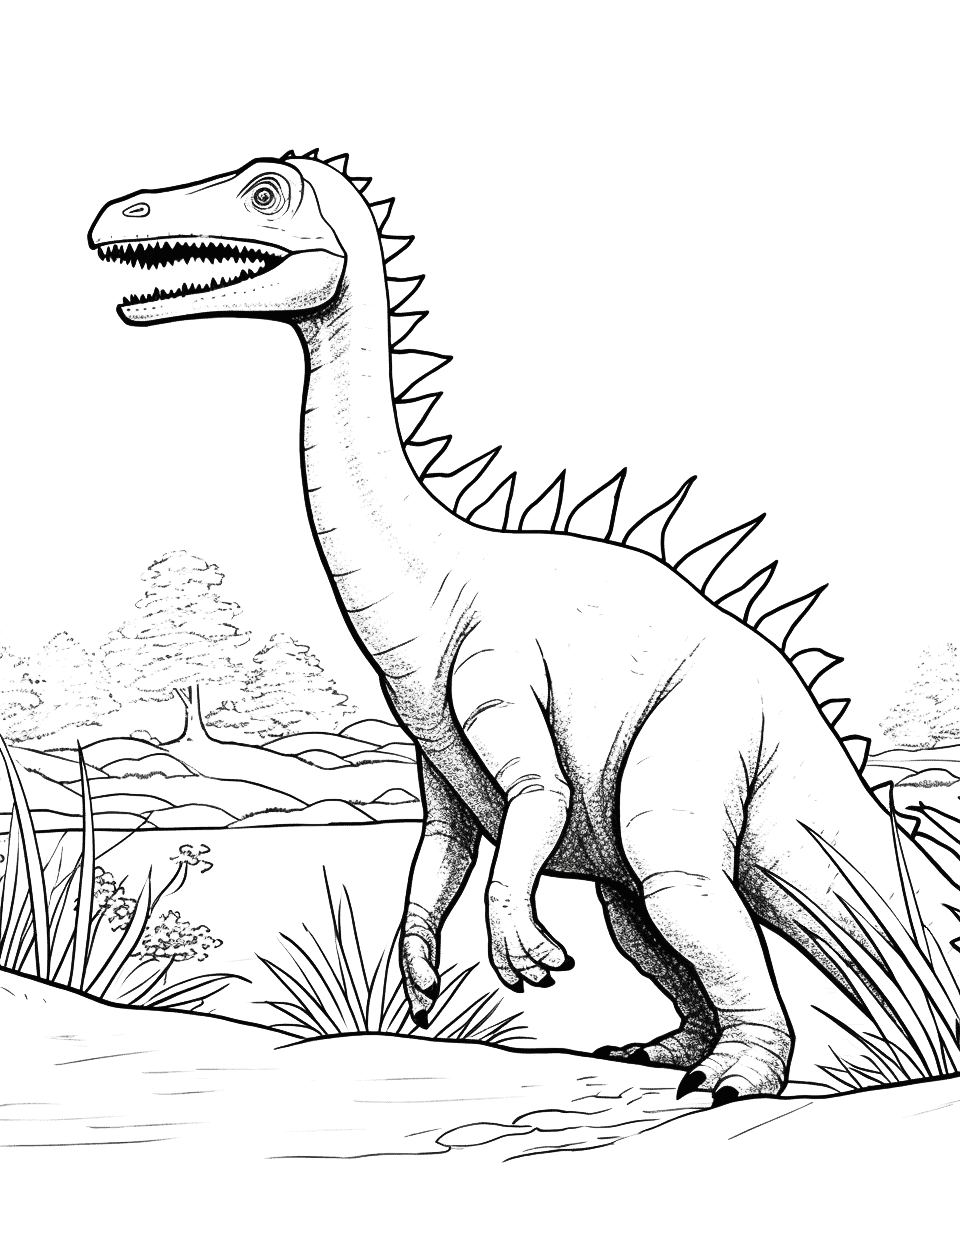 Realistic Spinosaurus Coloring Page - A detailed, realistic Spinosaurus prowling near a prehistoric river.